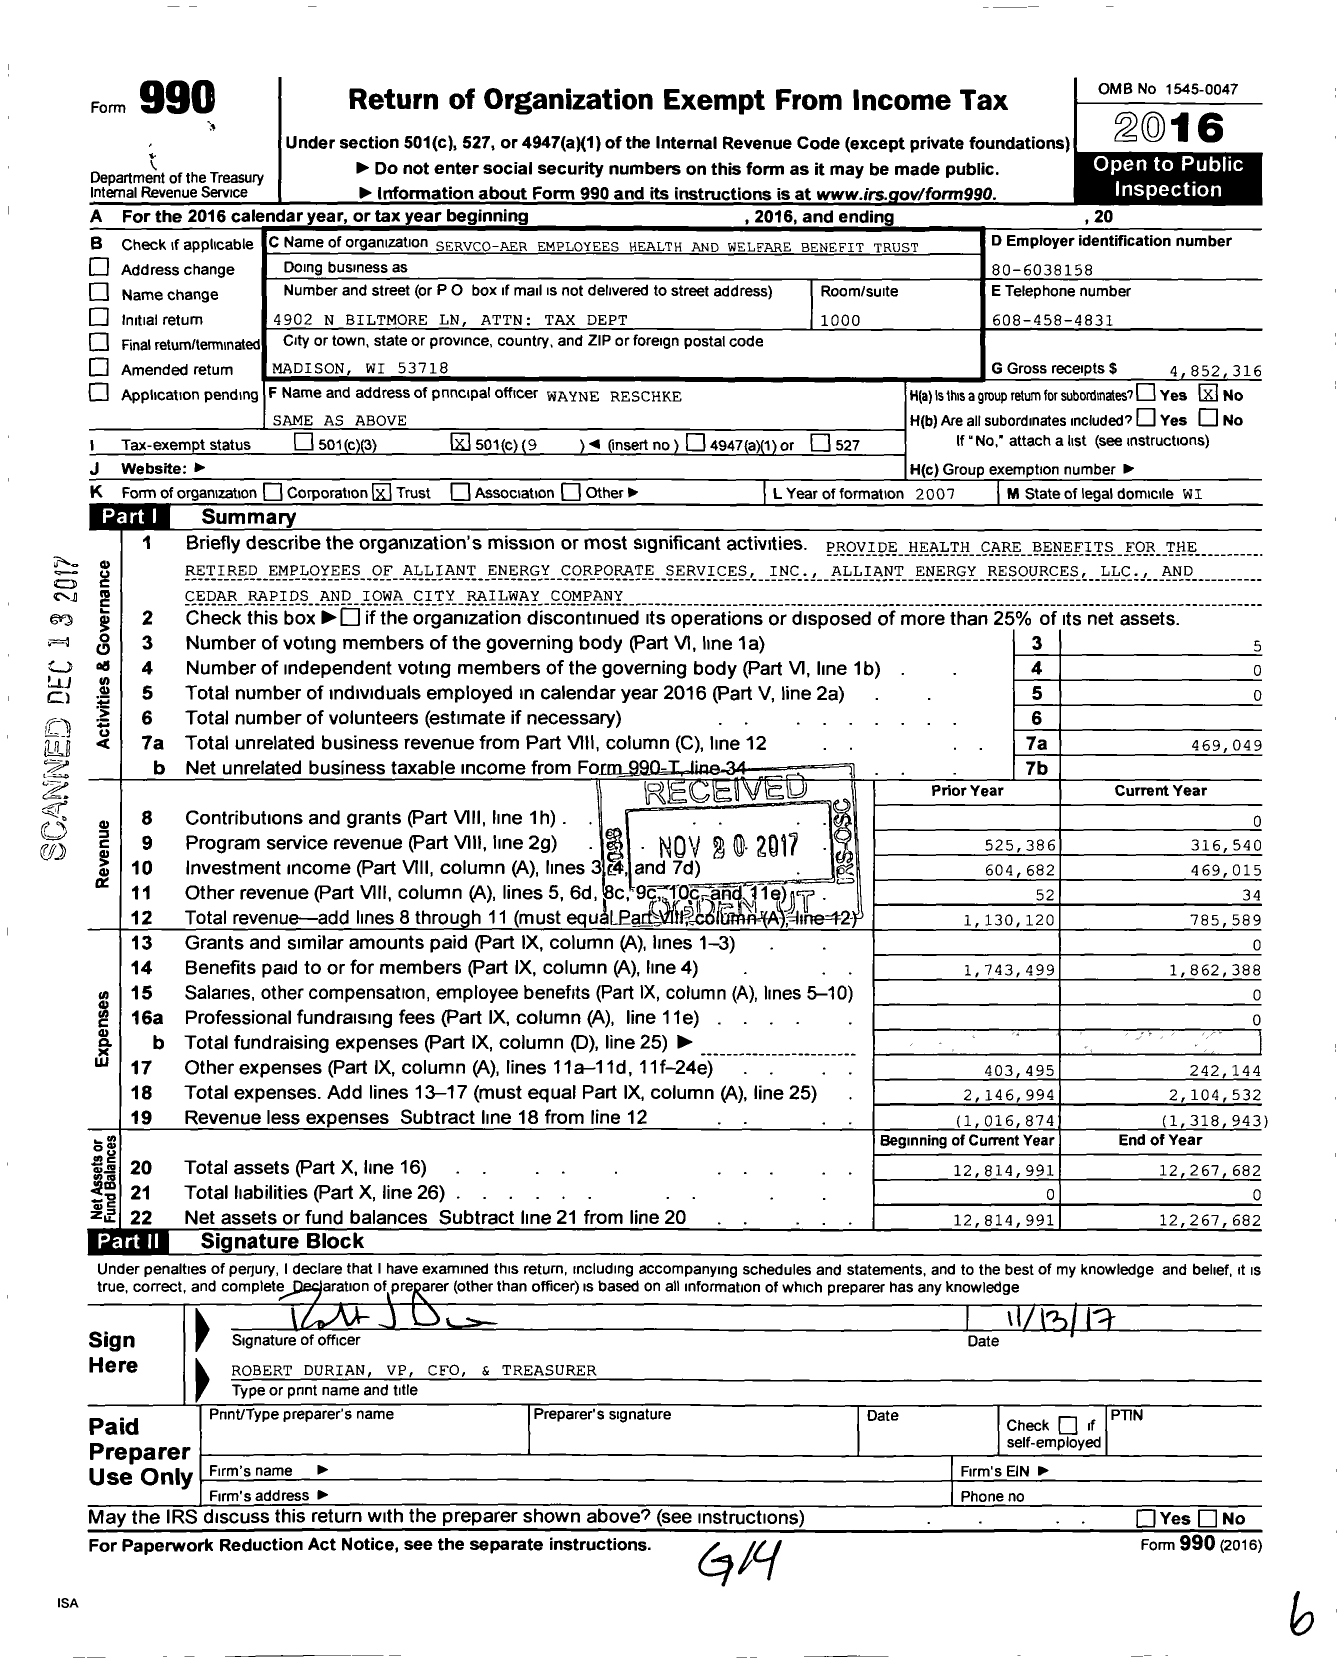 Image of first page of 2016 Form 990O for Servco-Aer Employees Health and Welfare Benefit Trust